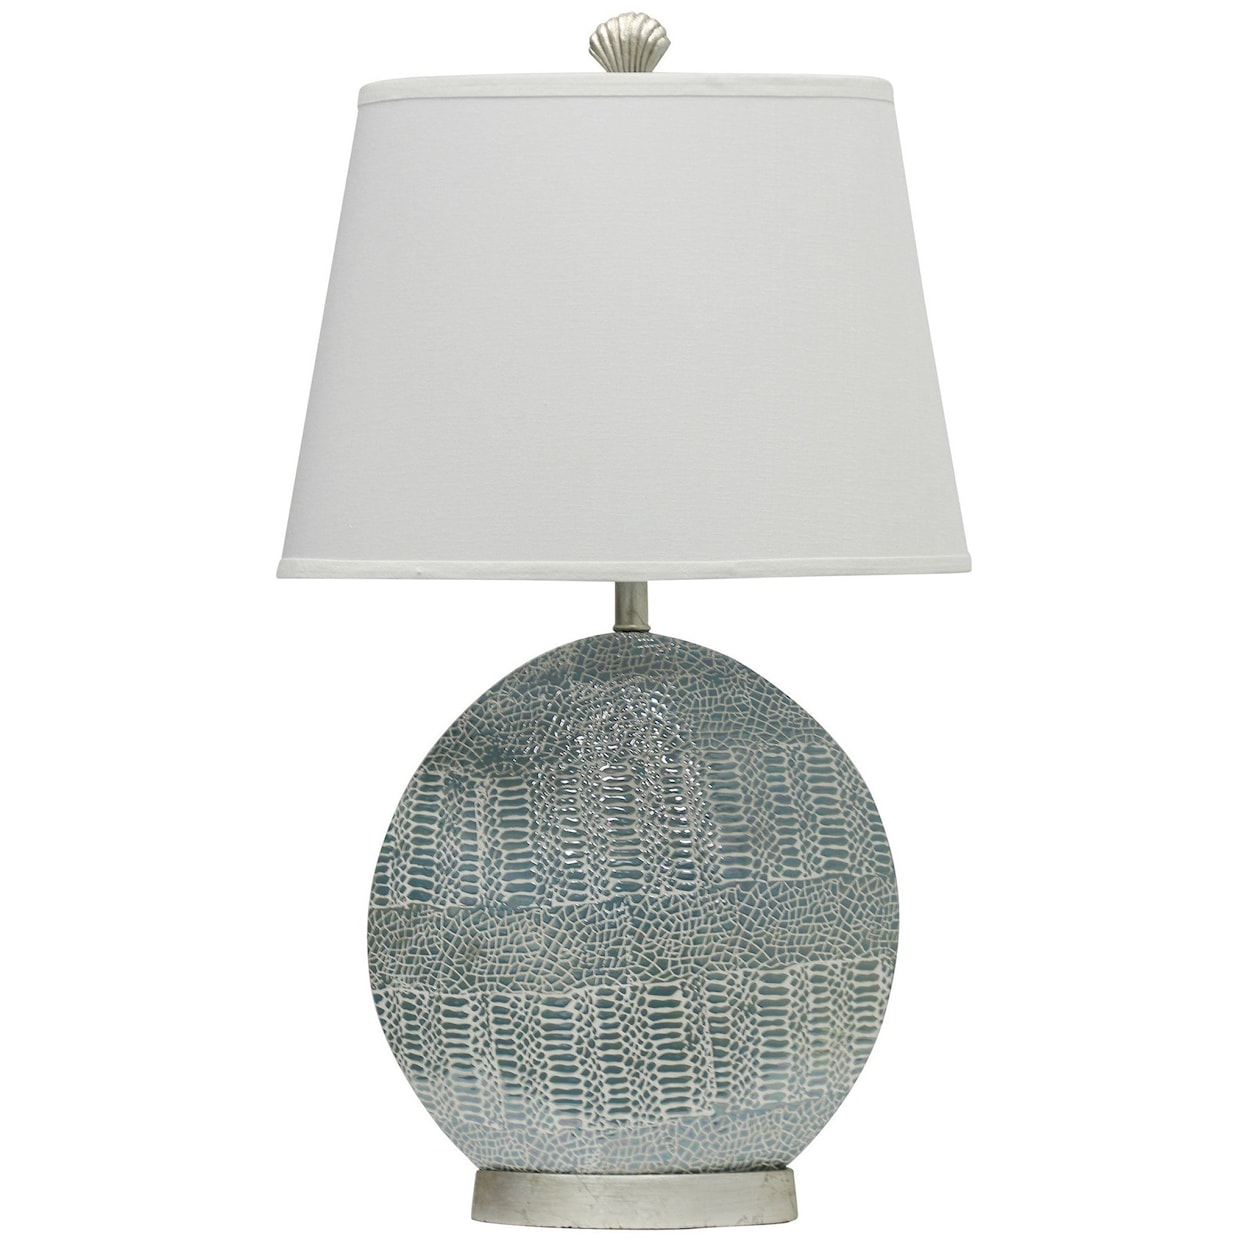 StyleCraft Lamps Crackled Ceramic Lamp by Jane Seymour